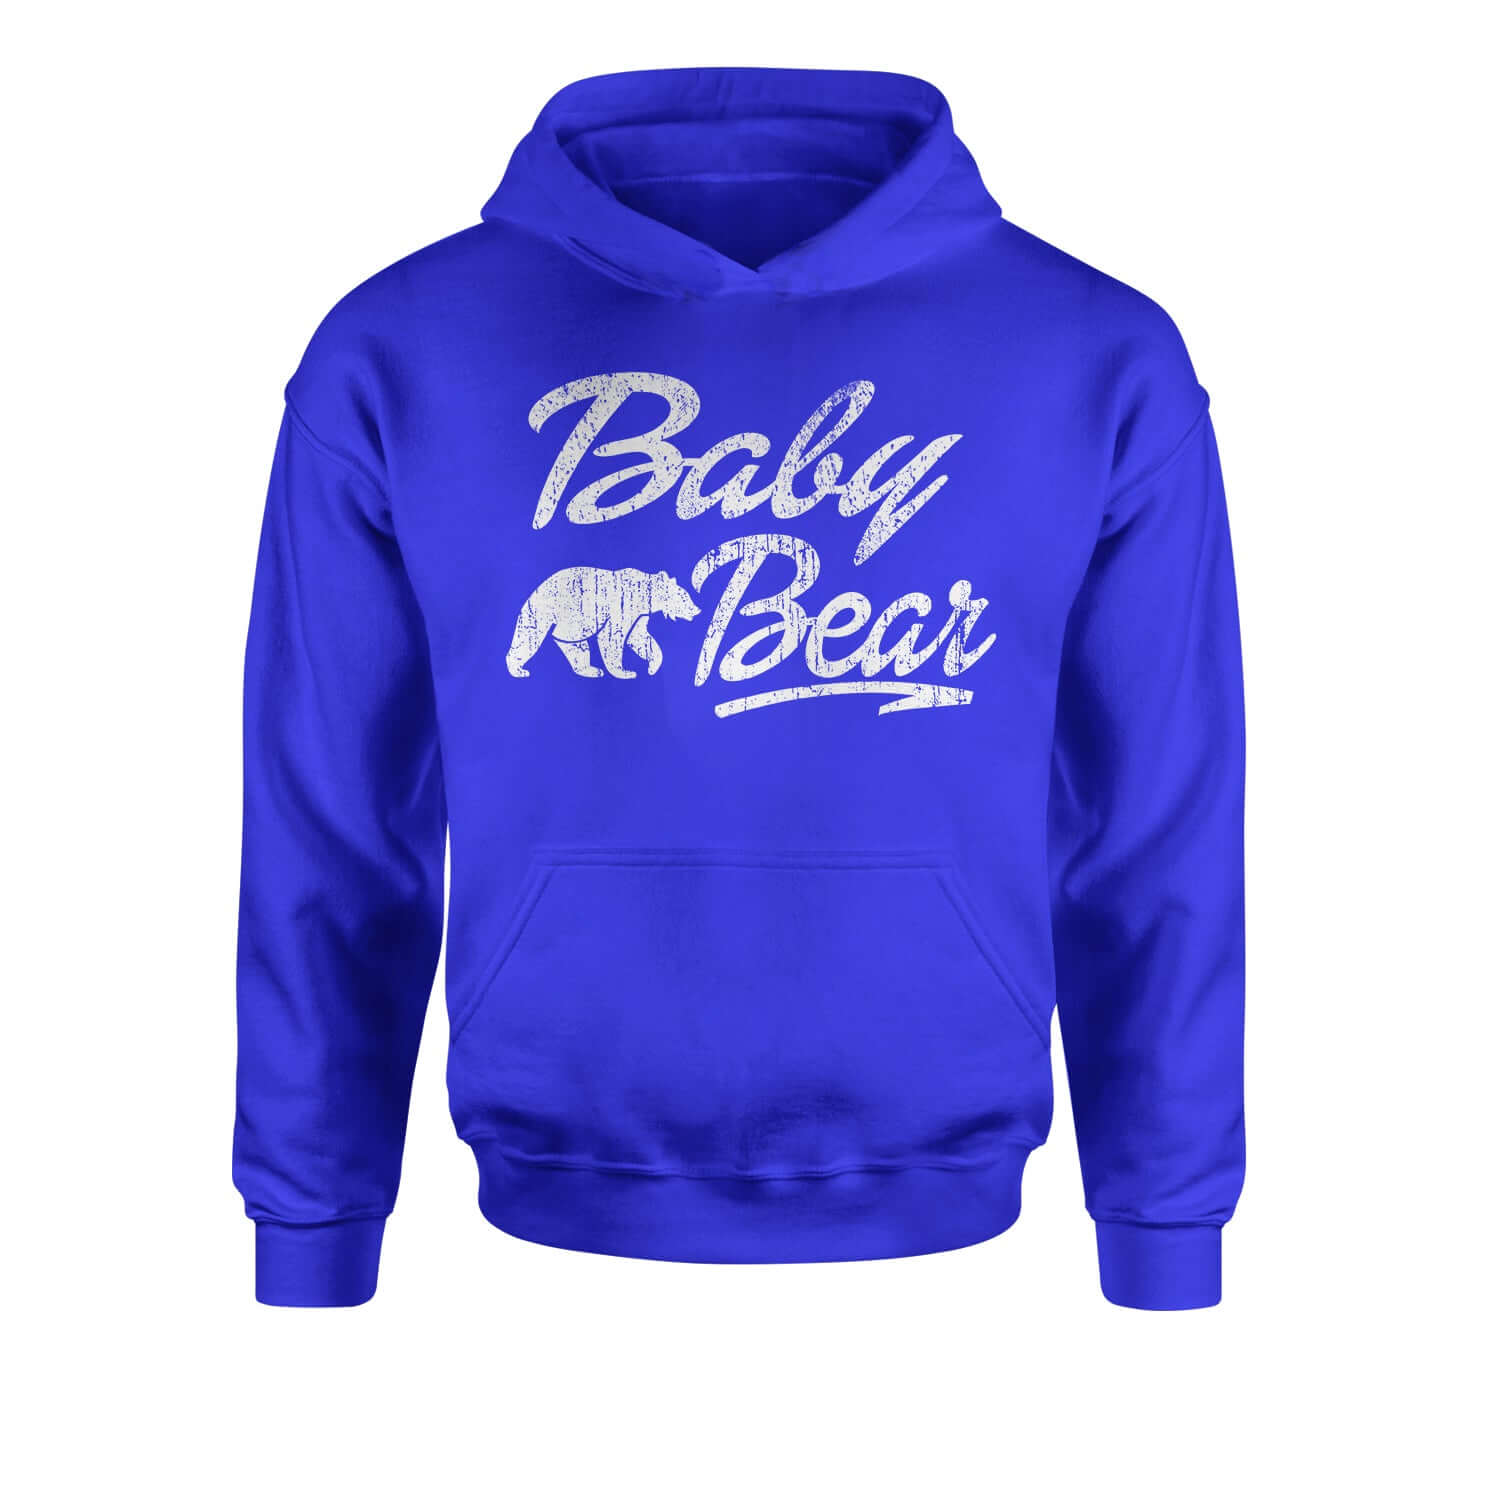 Baby Bear Cub Youth-Sized Hoodie bear, cub, family, matching, shirts, tribe by Expression Tees